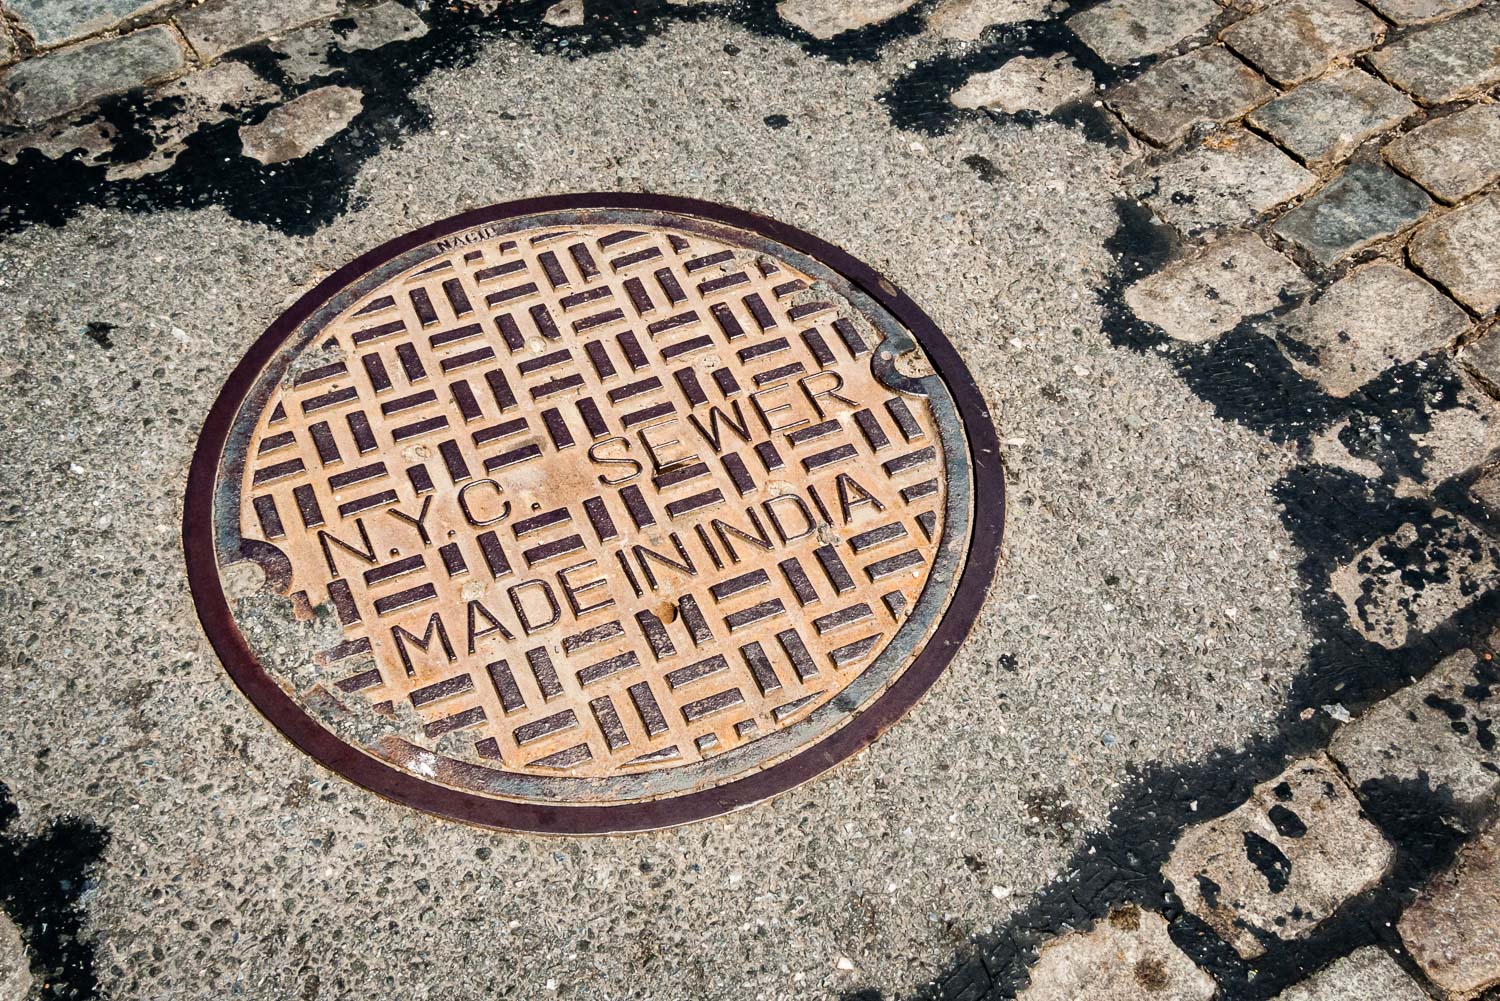 new-york-sewer-made-in-india.jpg